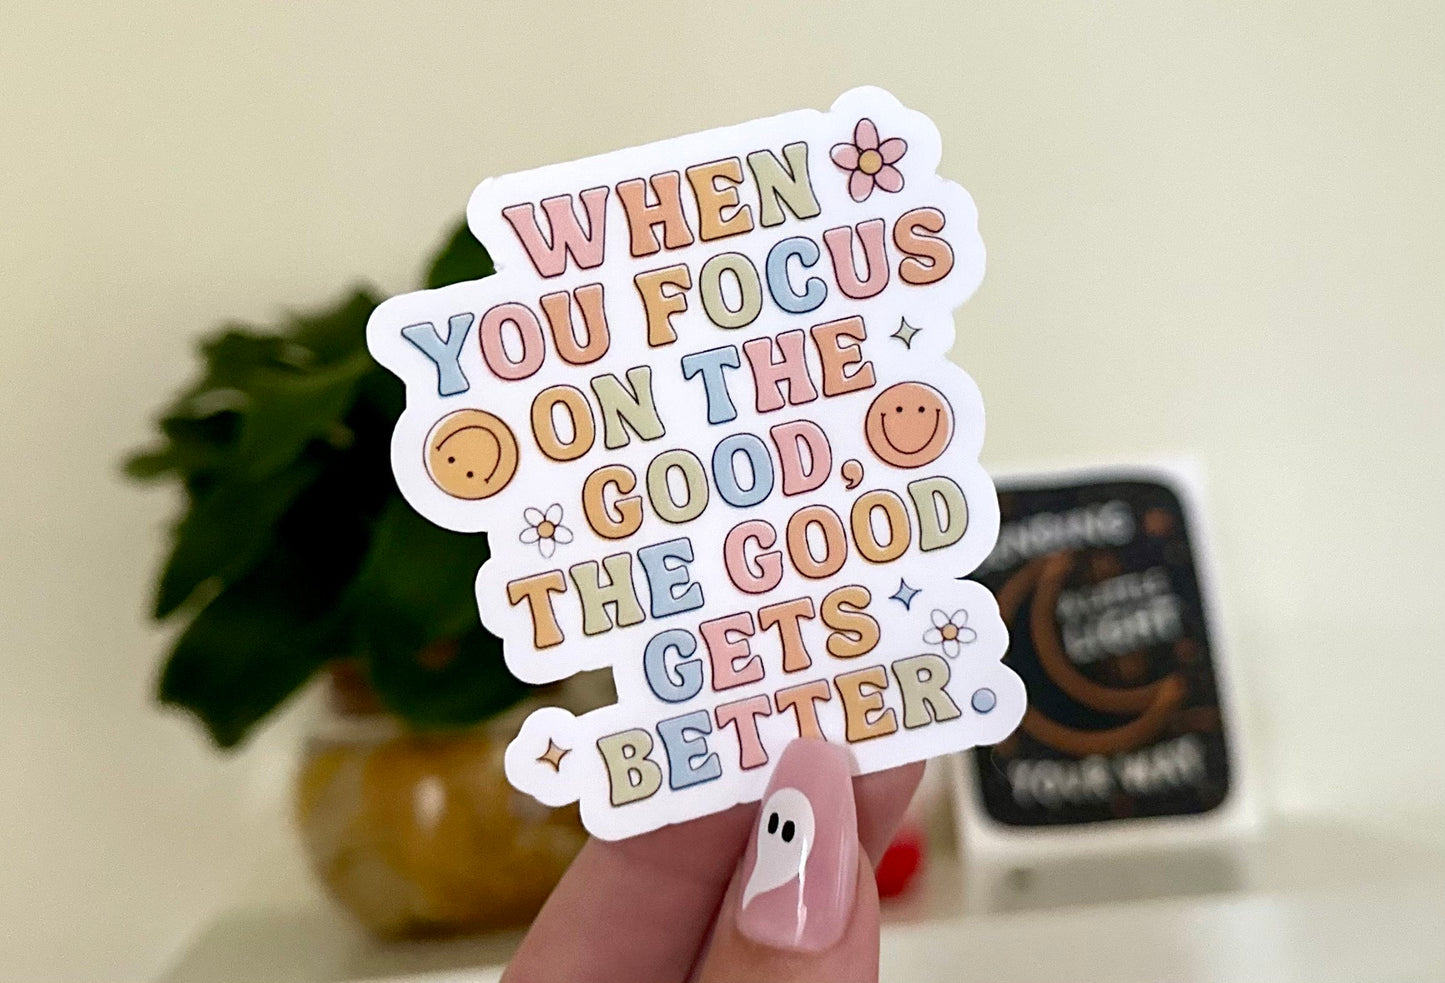 When You Focus On The Good, The Good Gets Better Waterproof Sticker, Intuition, Self Care, Self Love, Mental Health Gifts, Anxious